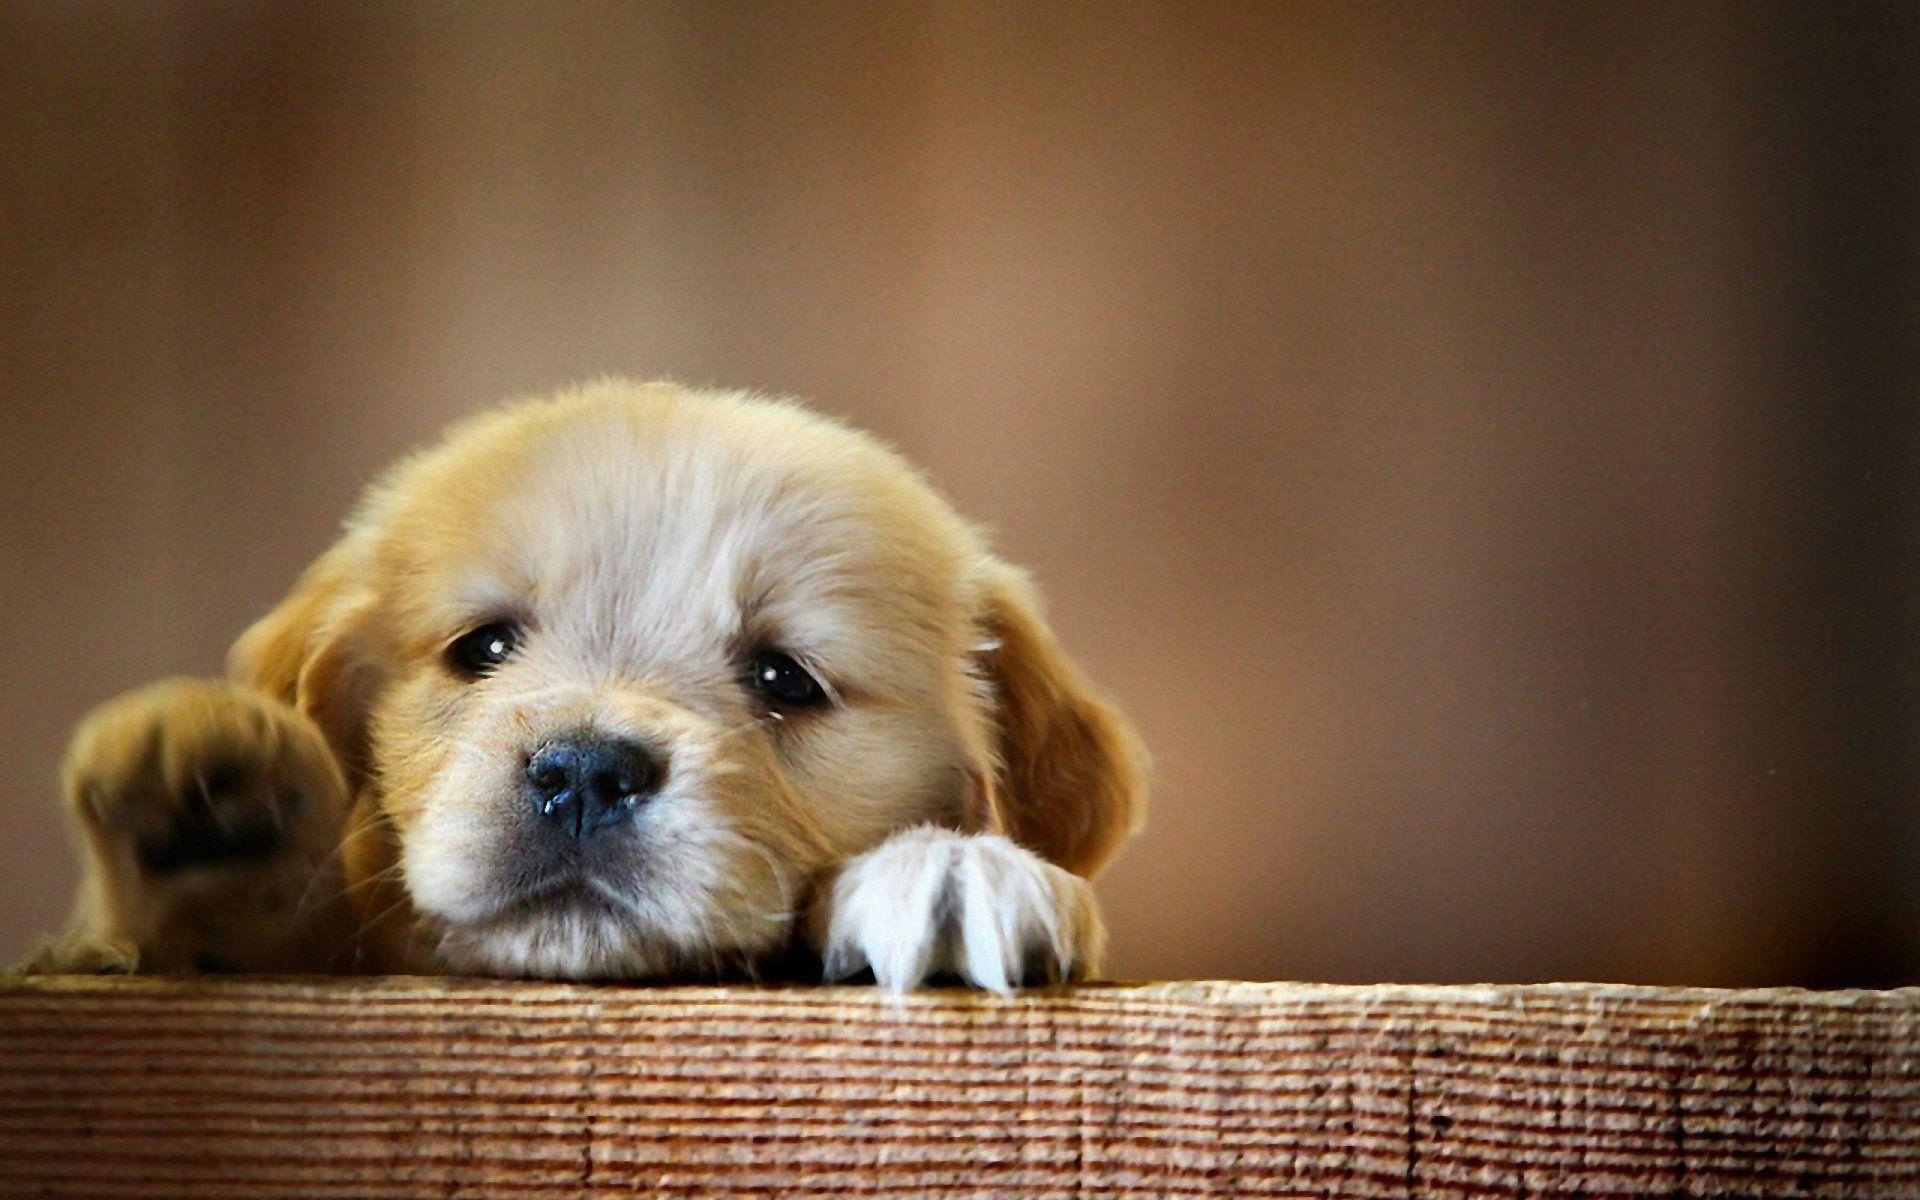 Baby Dog Wallpaper For Windows #Idi. Cute baby dogs